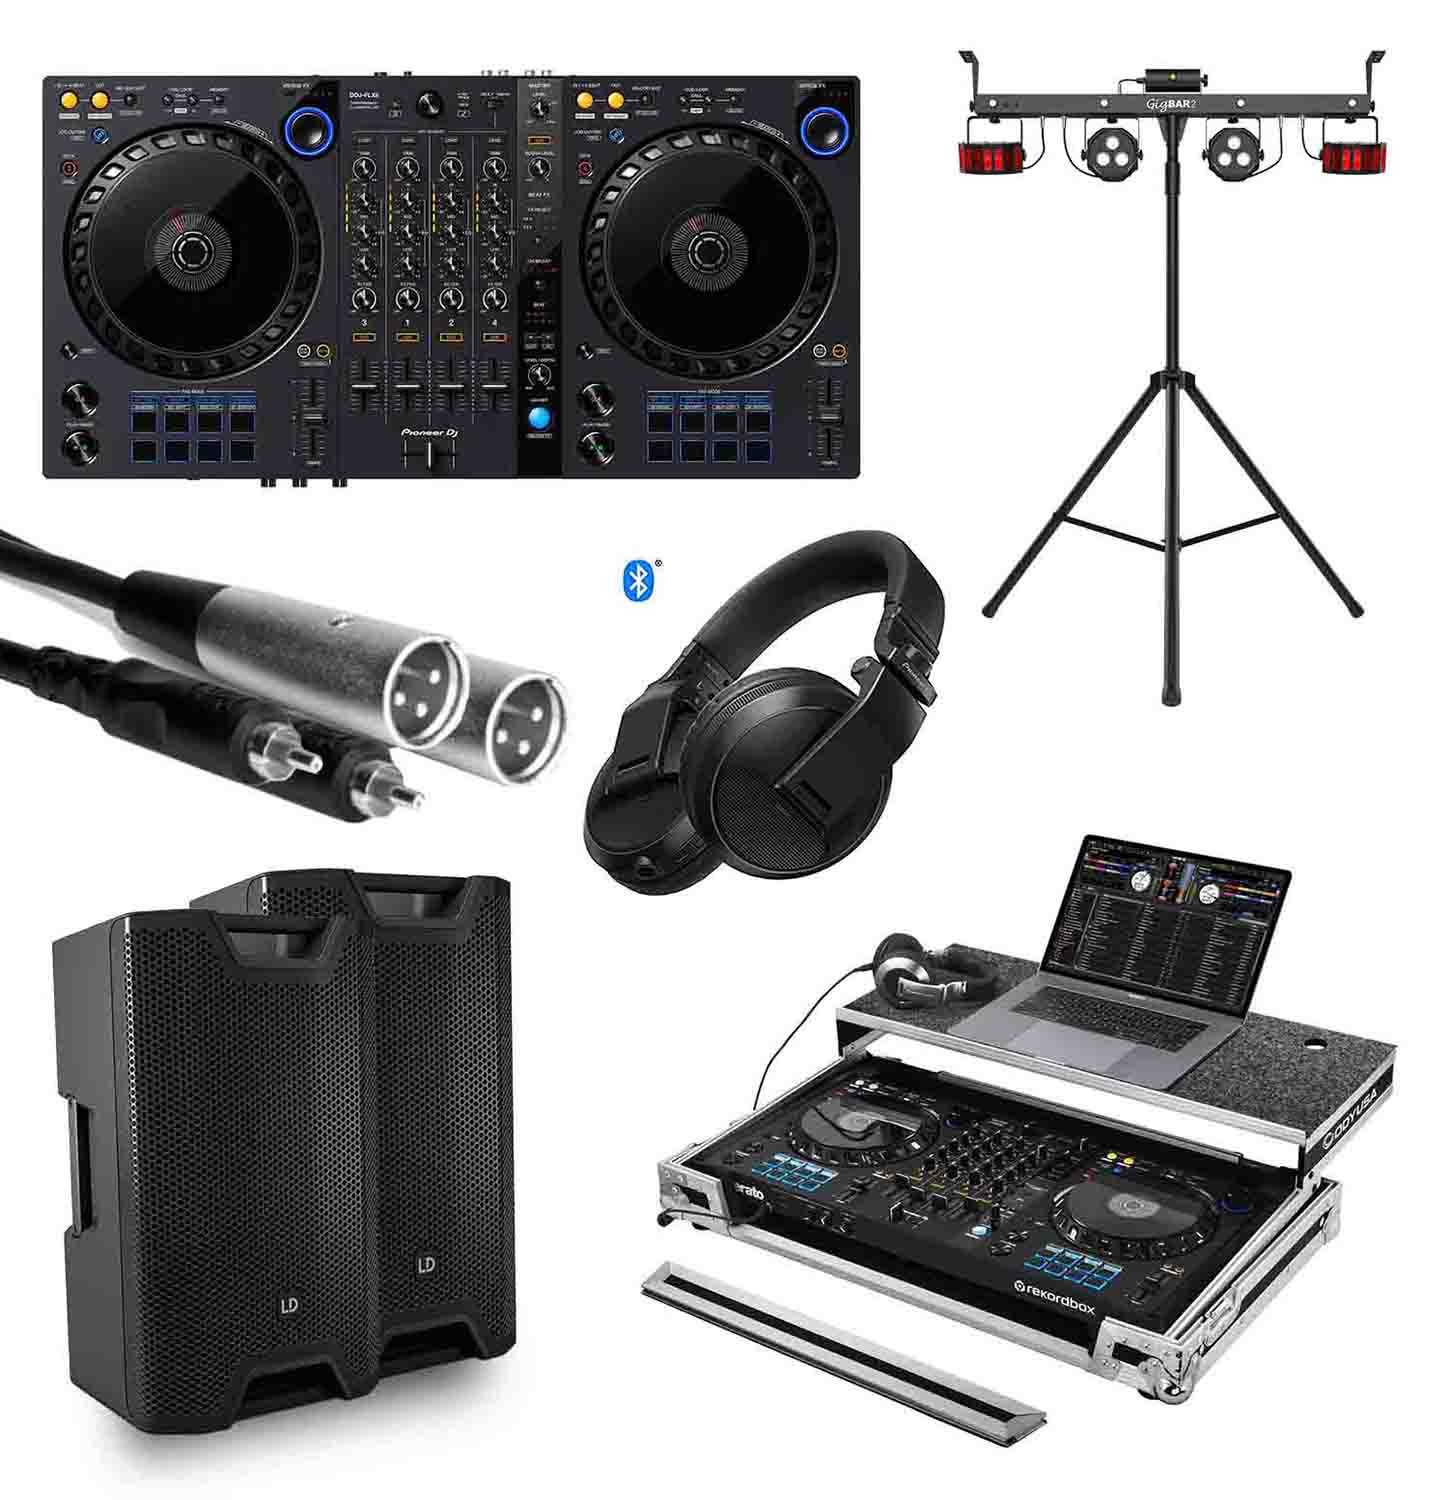 DJ Package for Club with Pioneer DJ Controller, Case, Headphones, Loudspeaker, Cable and LED Lighting System - Hollywood DJ